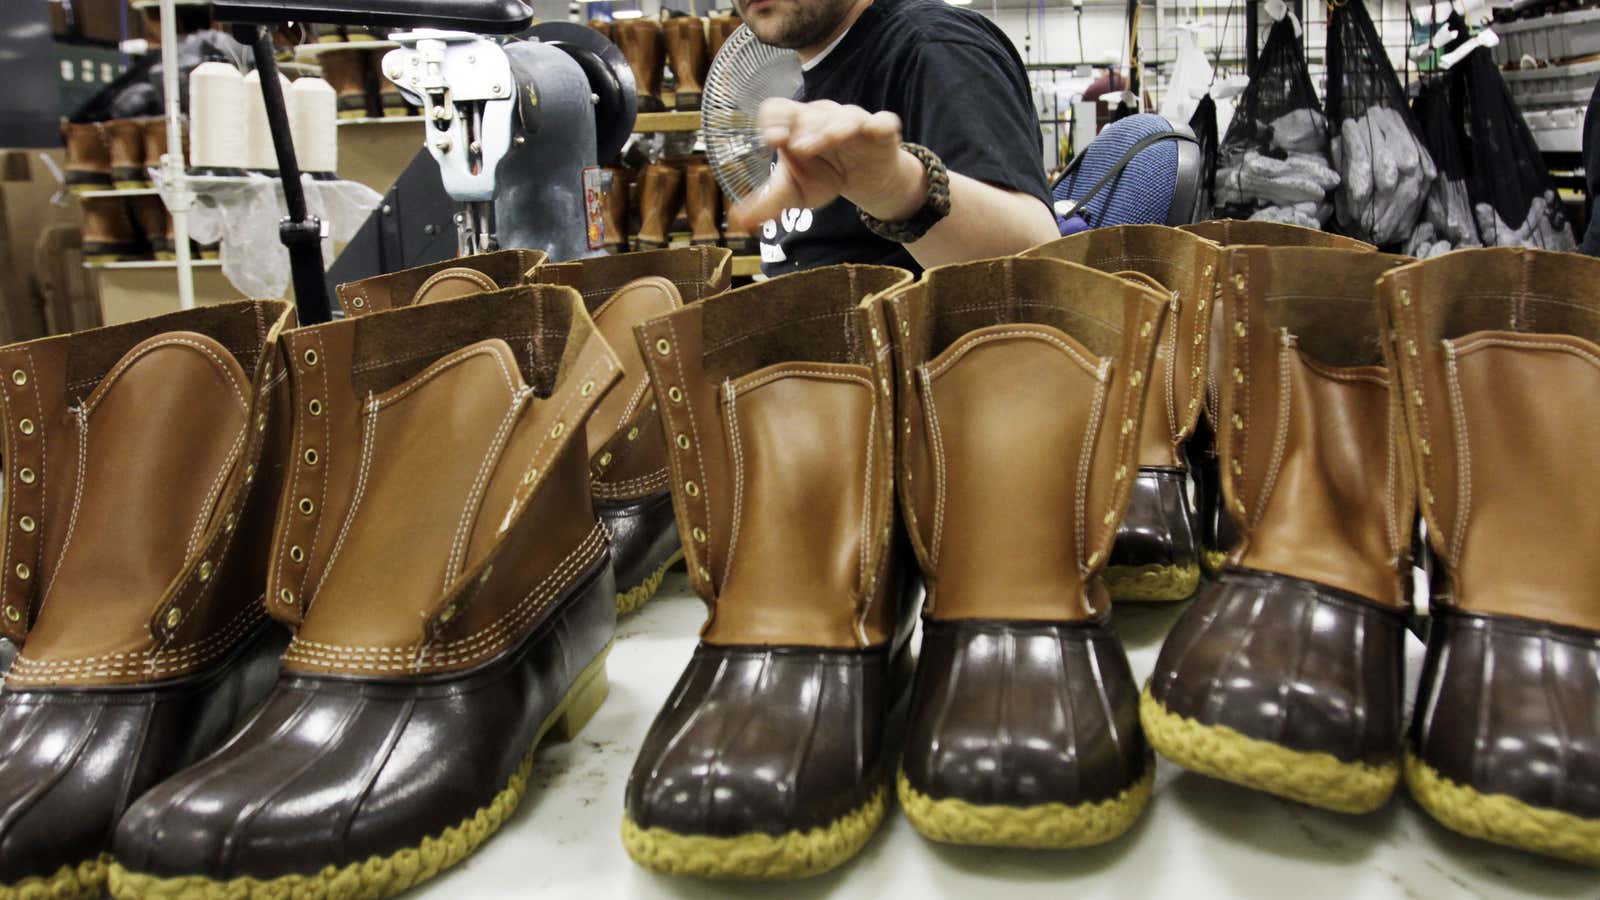 L.L. Bean’s famed duck boots would like to be excluded from this narrative.